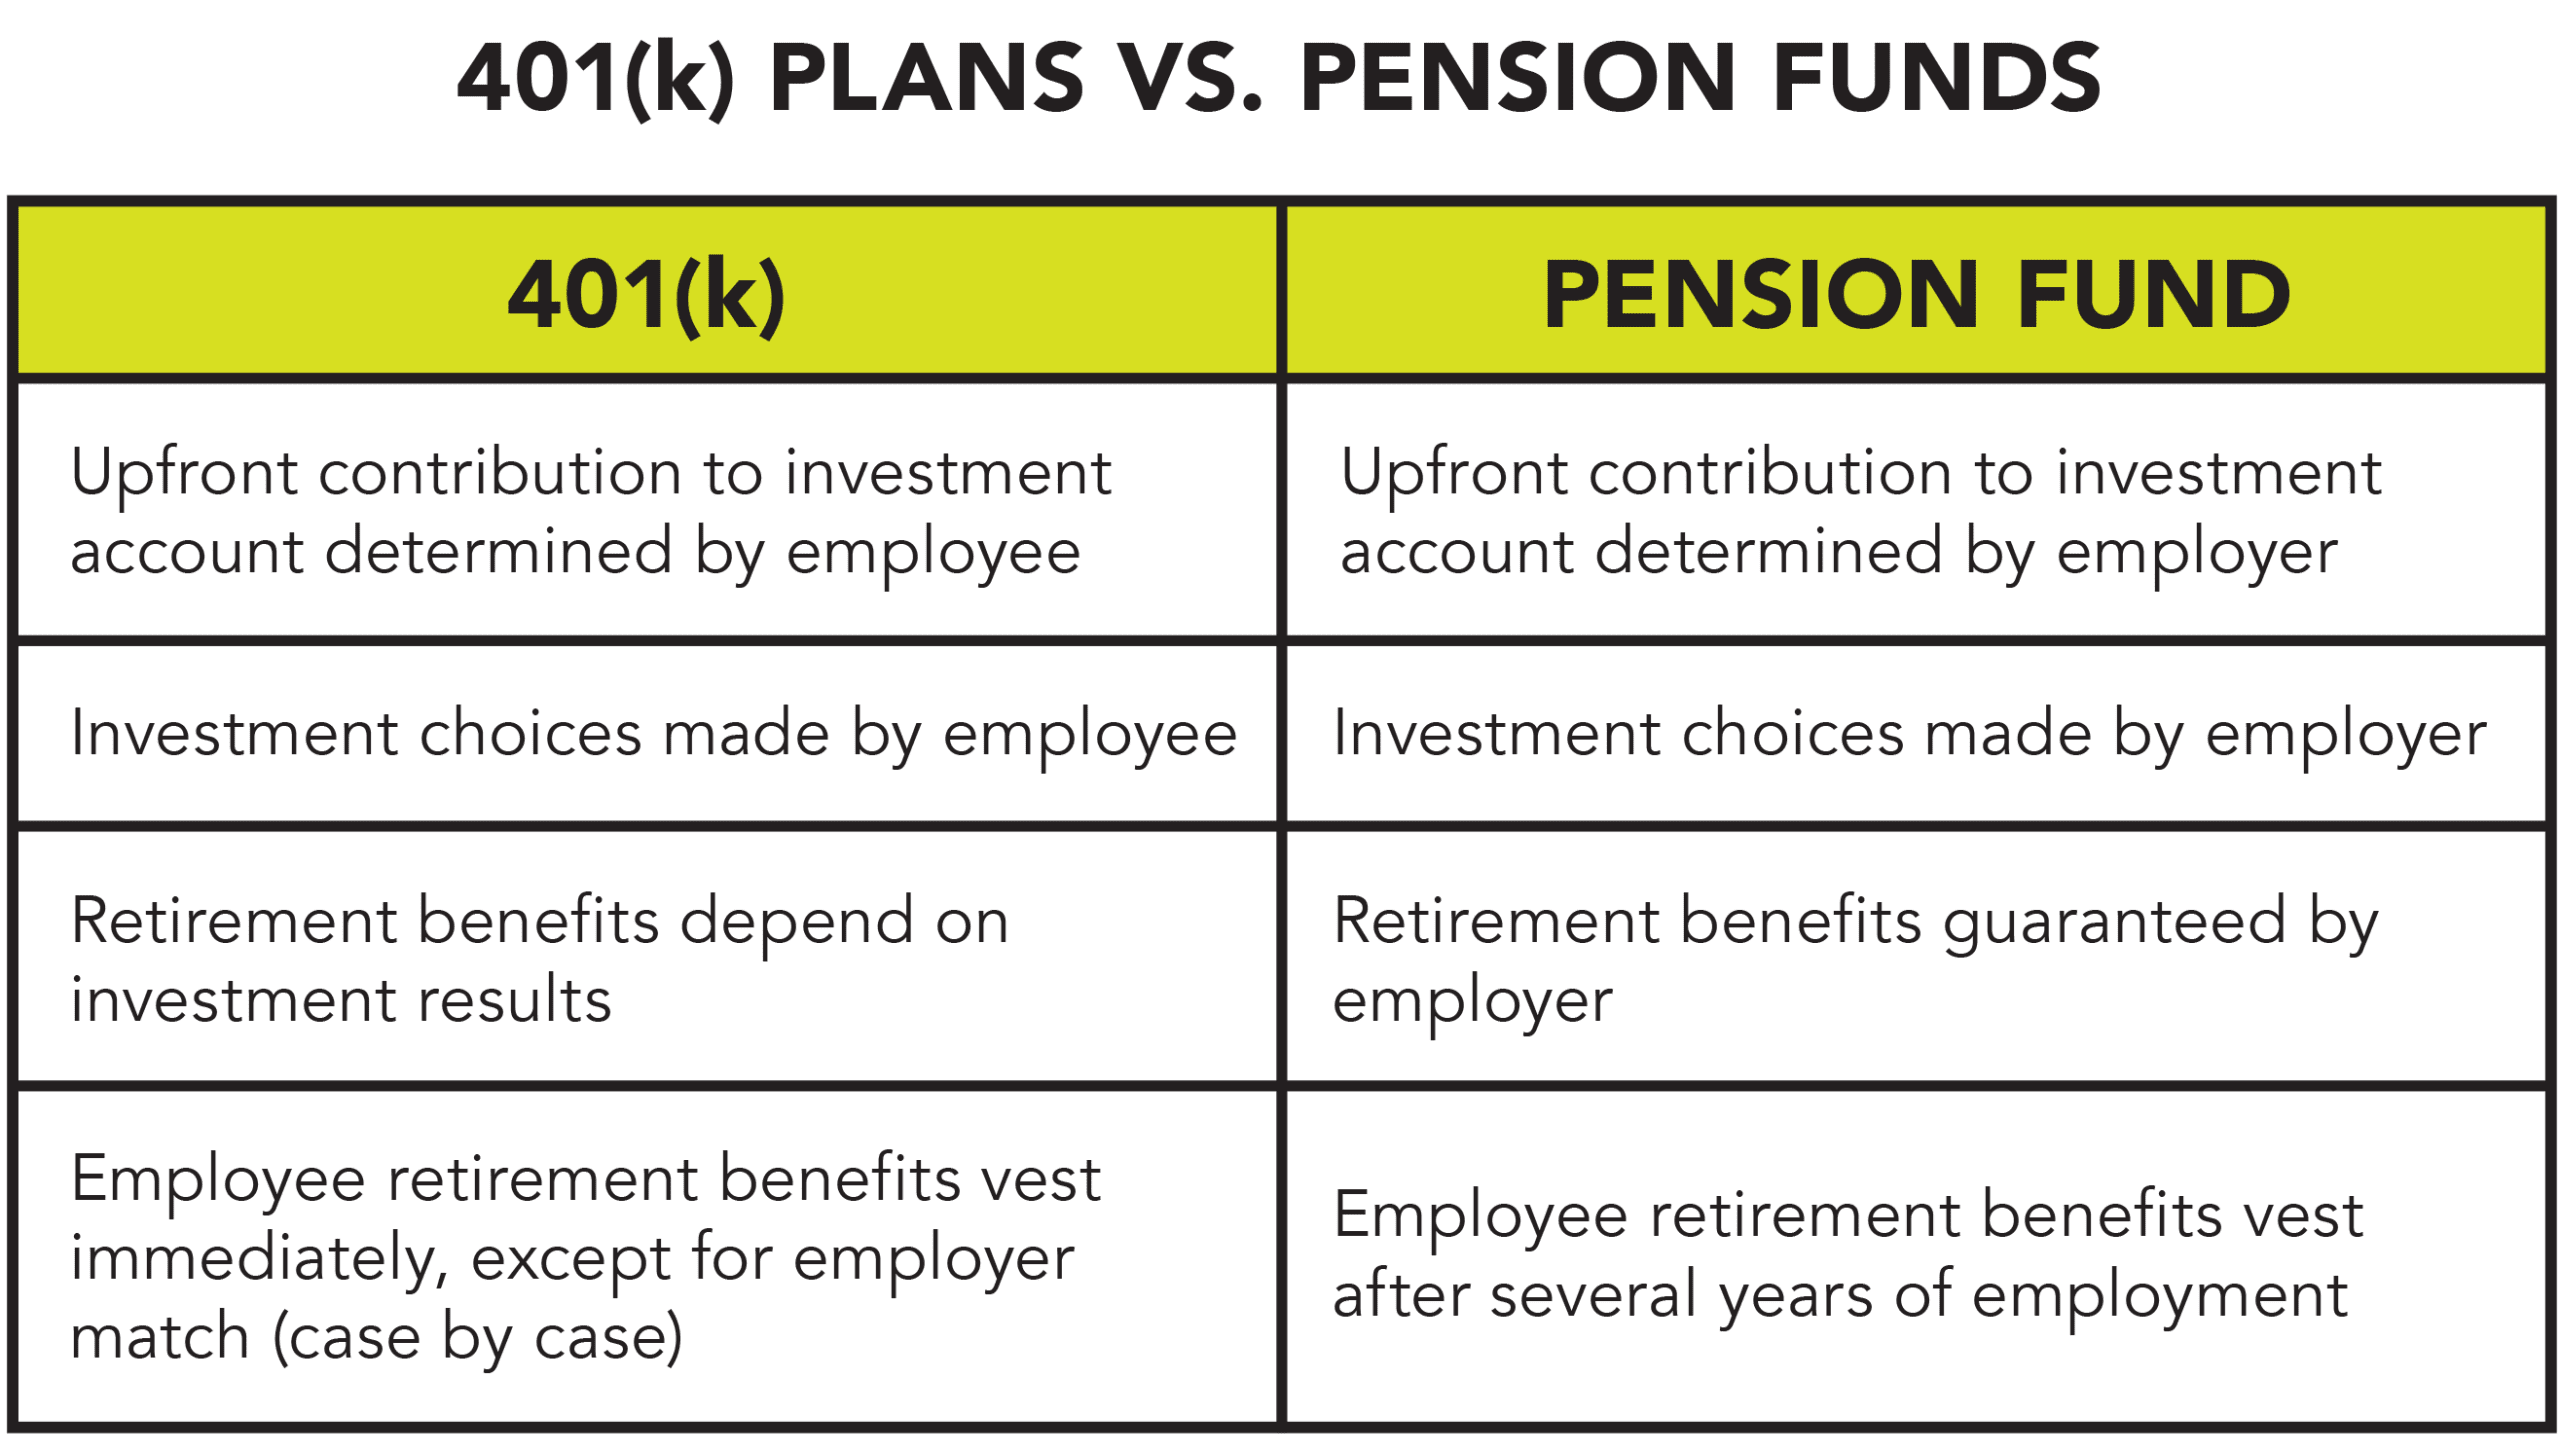 A simple table that compares and contrasts 401(k) plans and pension funds.